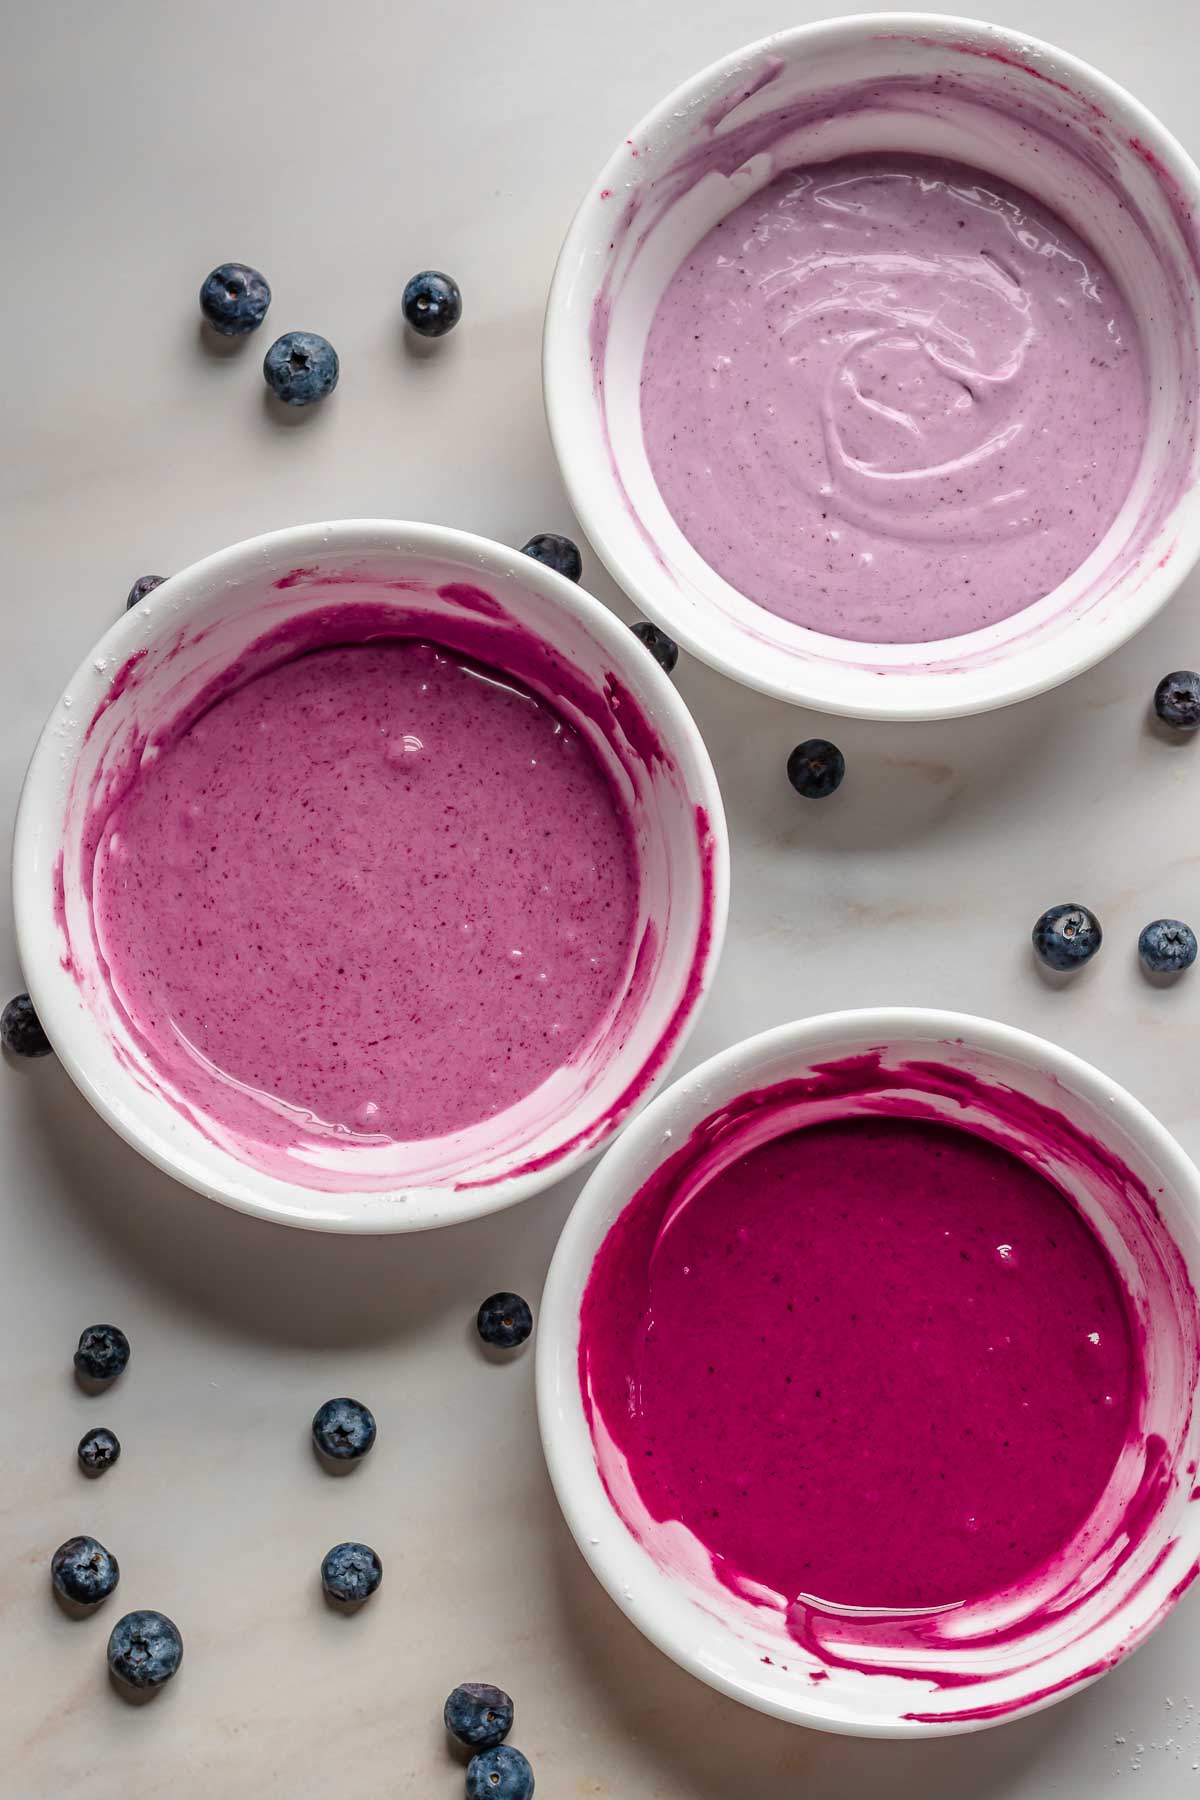 Bowls with three different colors of blueberry glaze.